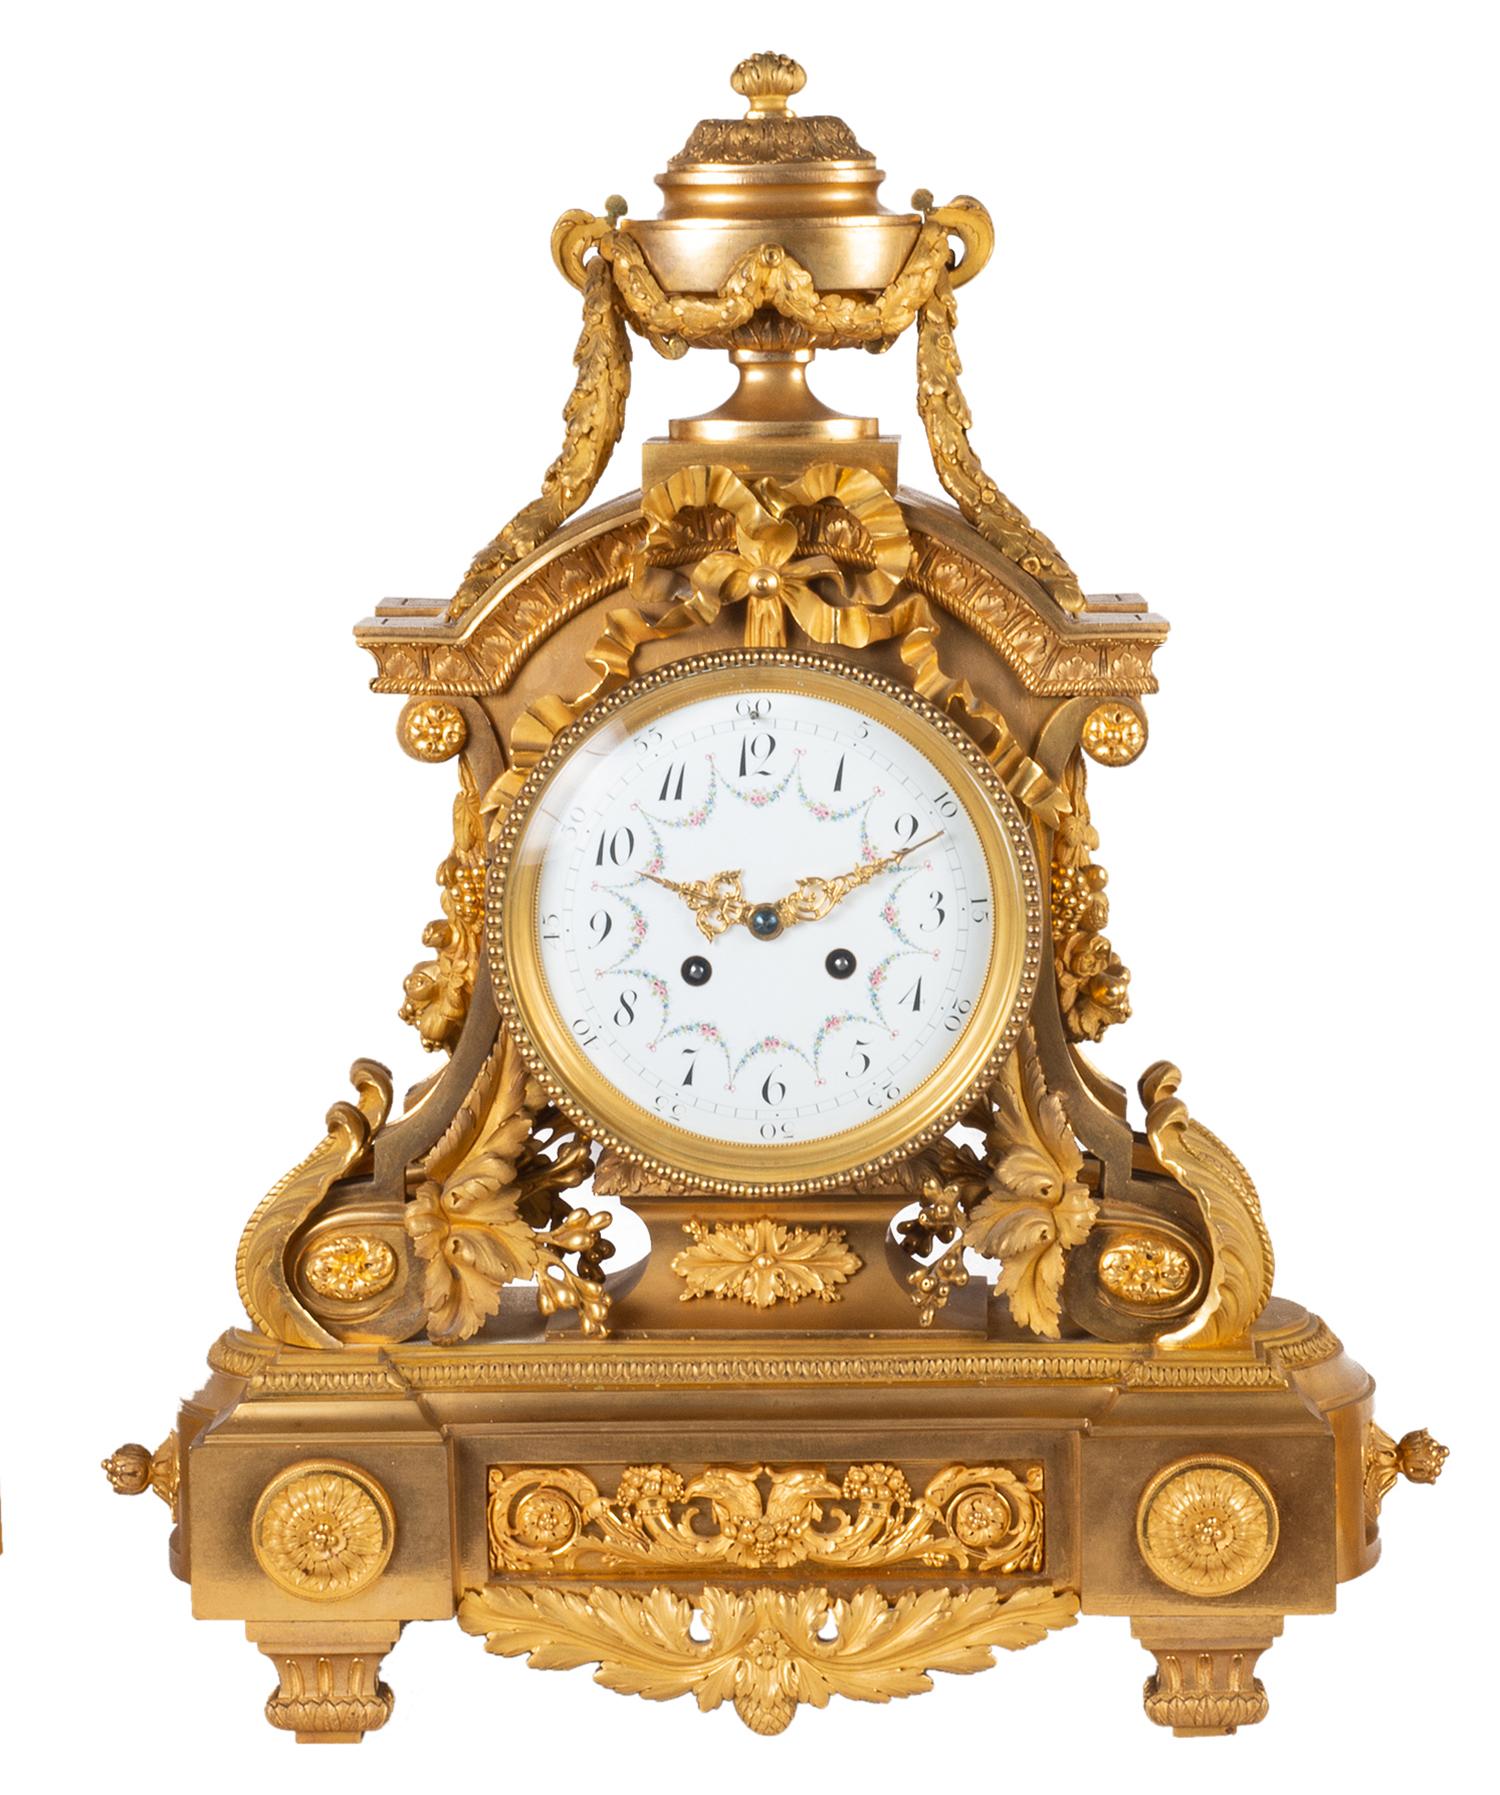 A very good quality 19th century Louis XVI style gilded ormolu clock garniture, the clock having a classical urn finial with garlands, ribbons and foliate decoration. The white enamel clock face with hand painted floral swags, an eight day duration